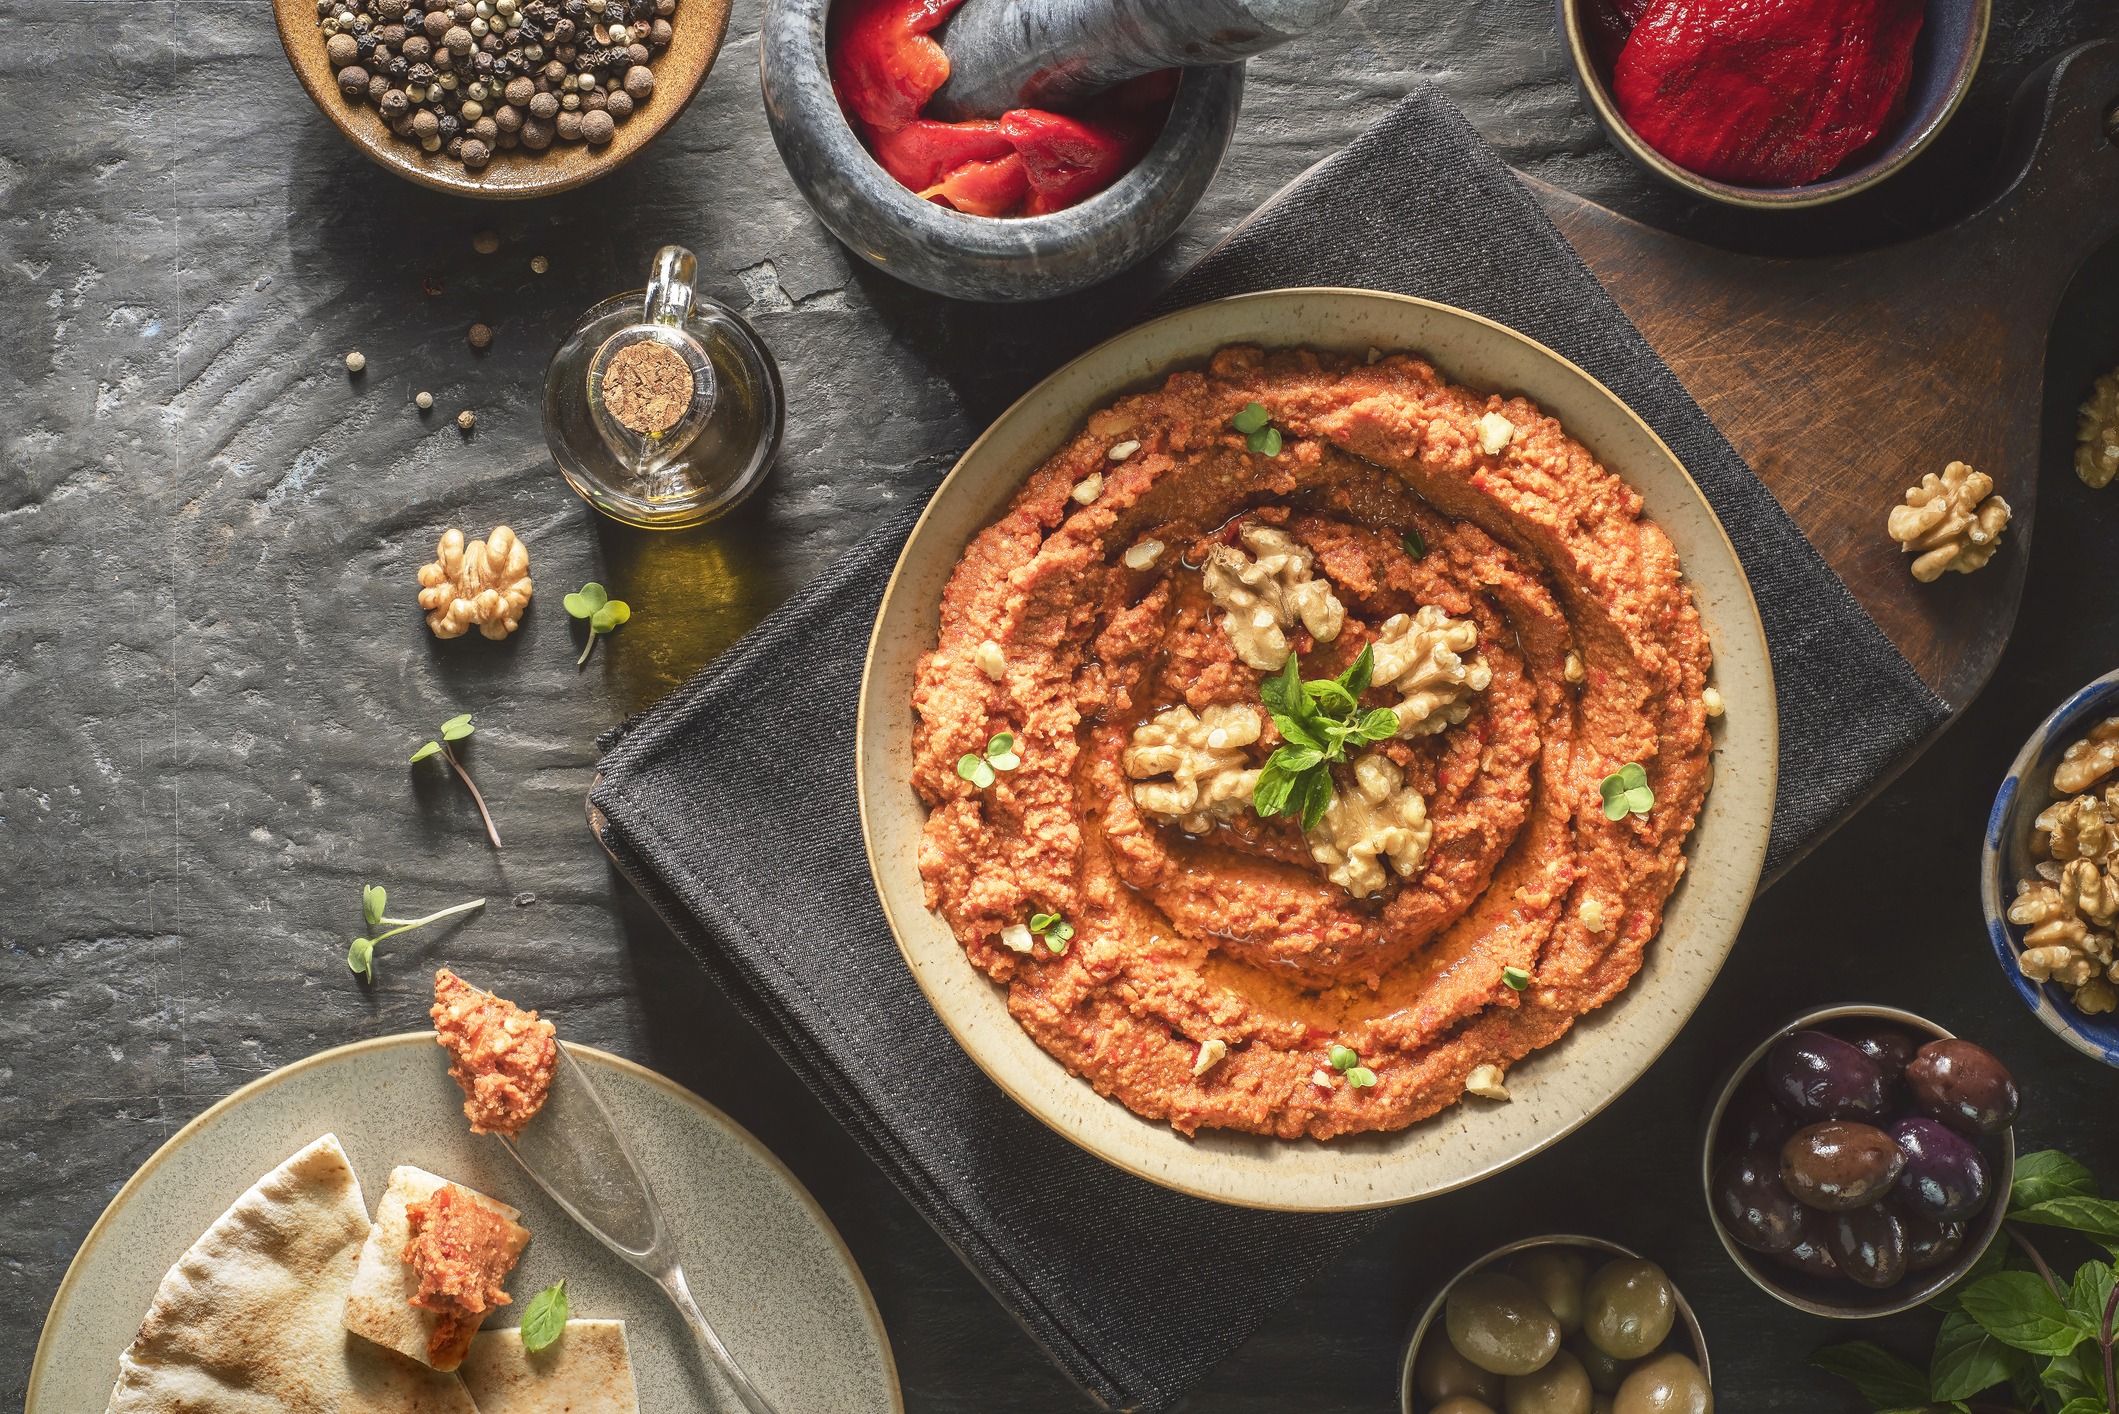 Dip made of red peppers and walnuts. Topped with walnut halves and herbs. Accompanied by bowls of olives and a plate with pita bread.